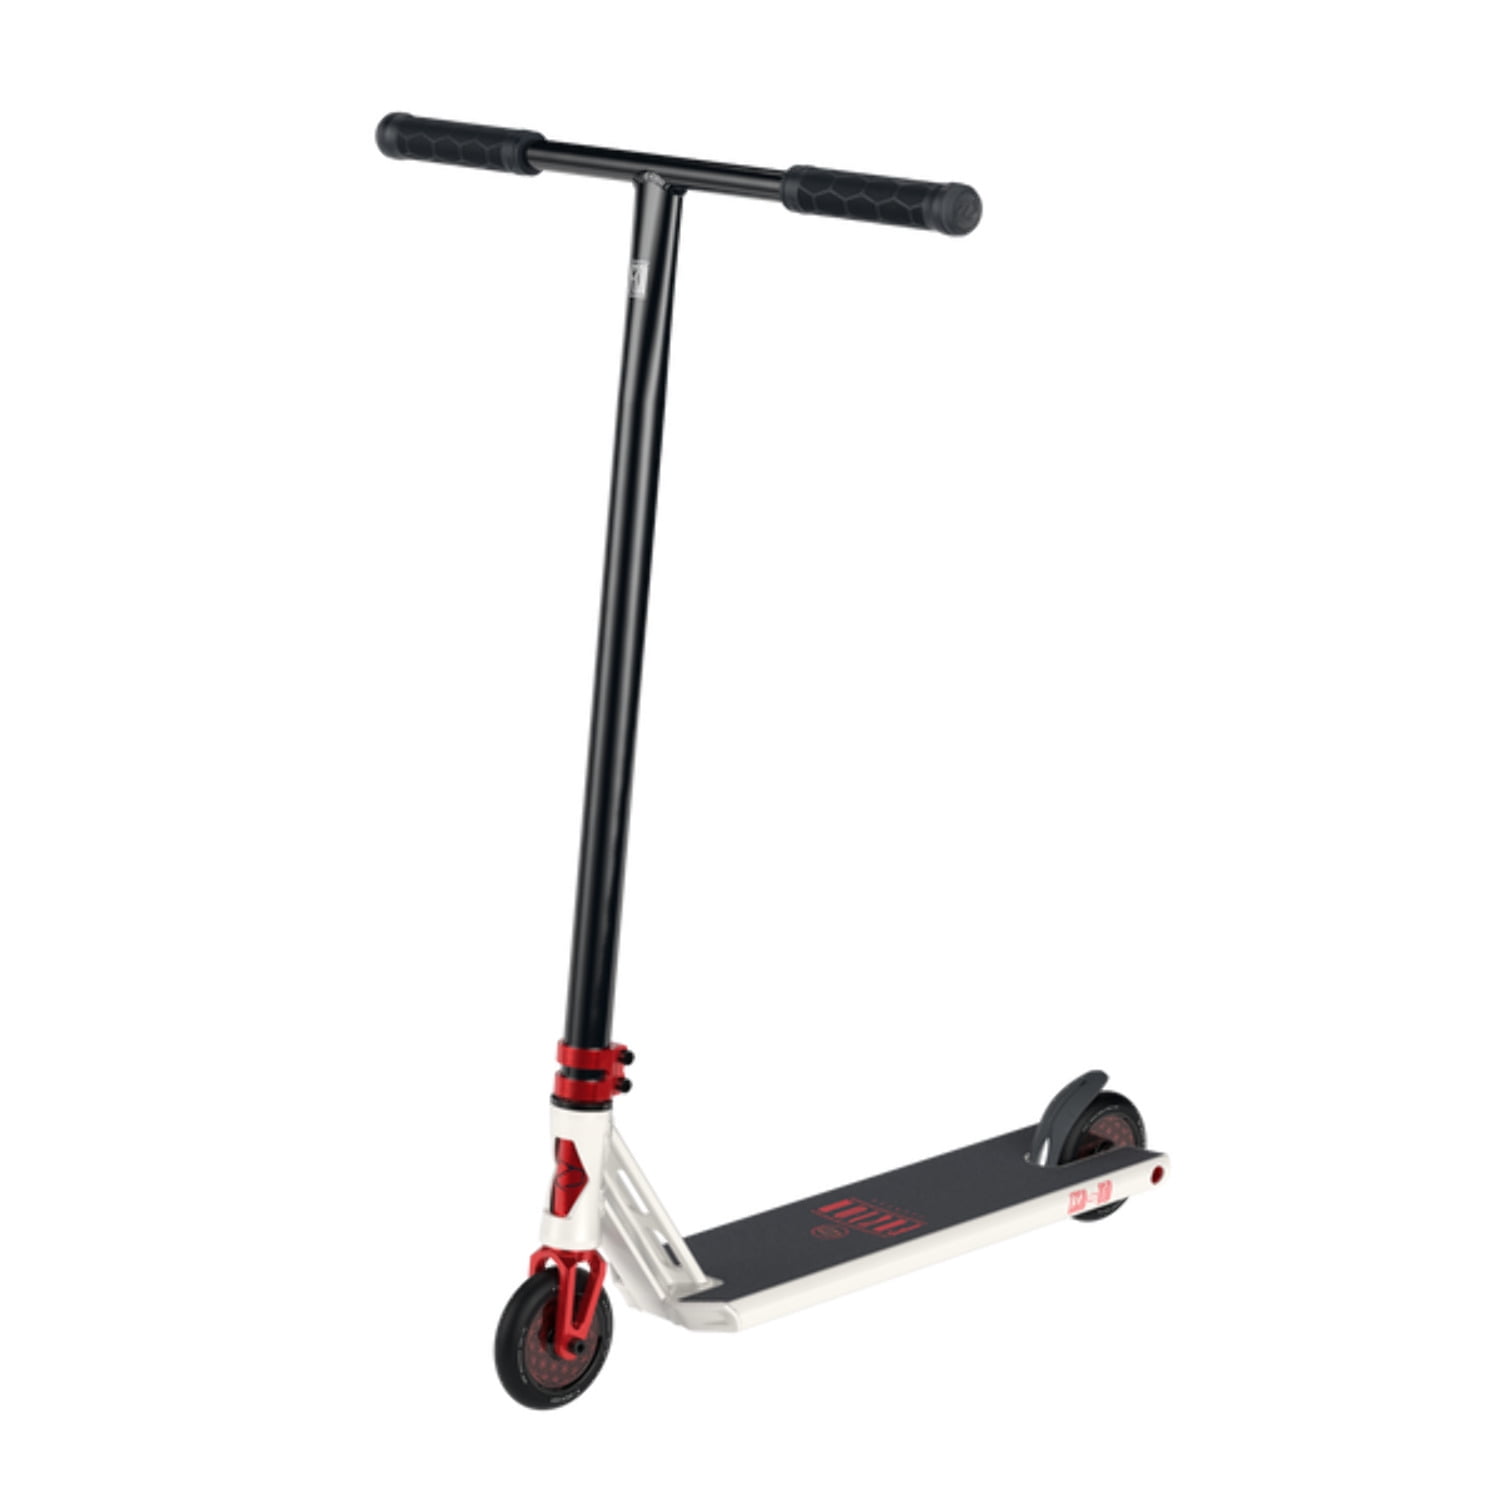 Certified Refurbished Fuzion Z350 Pro Scooter 